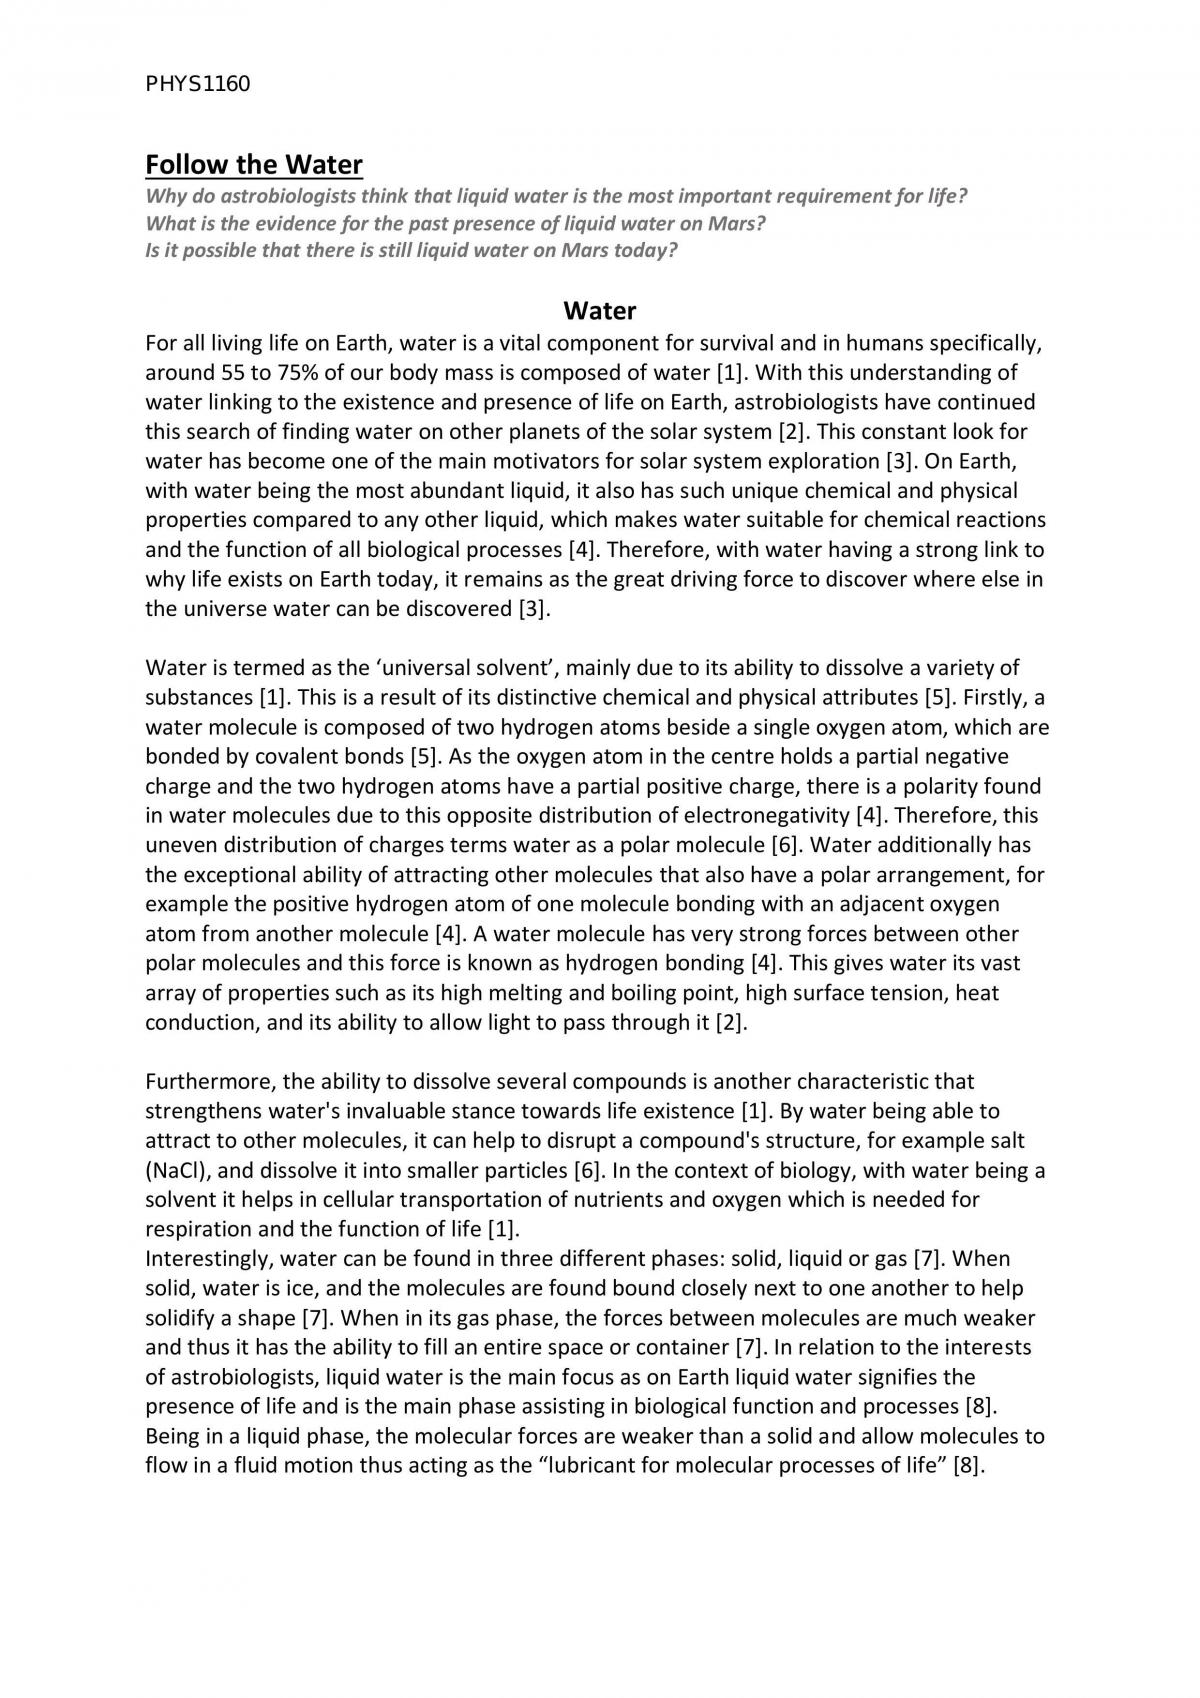 1 minute essay on water